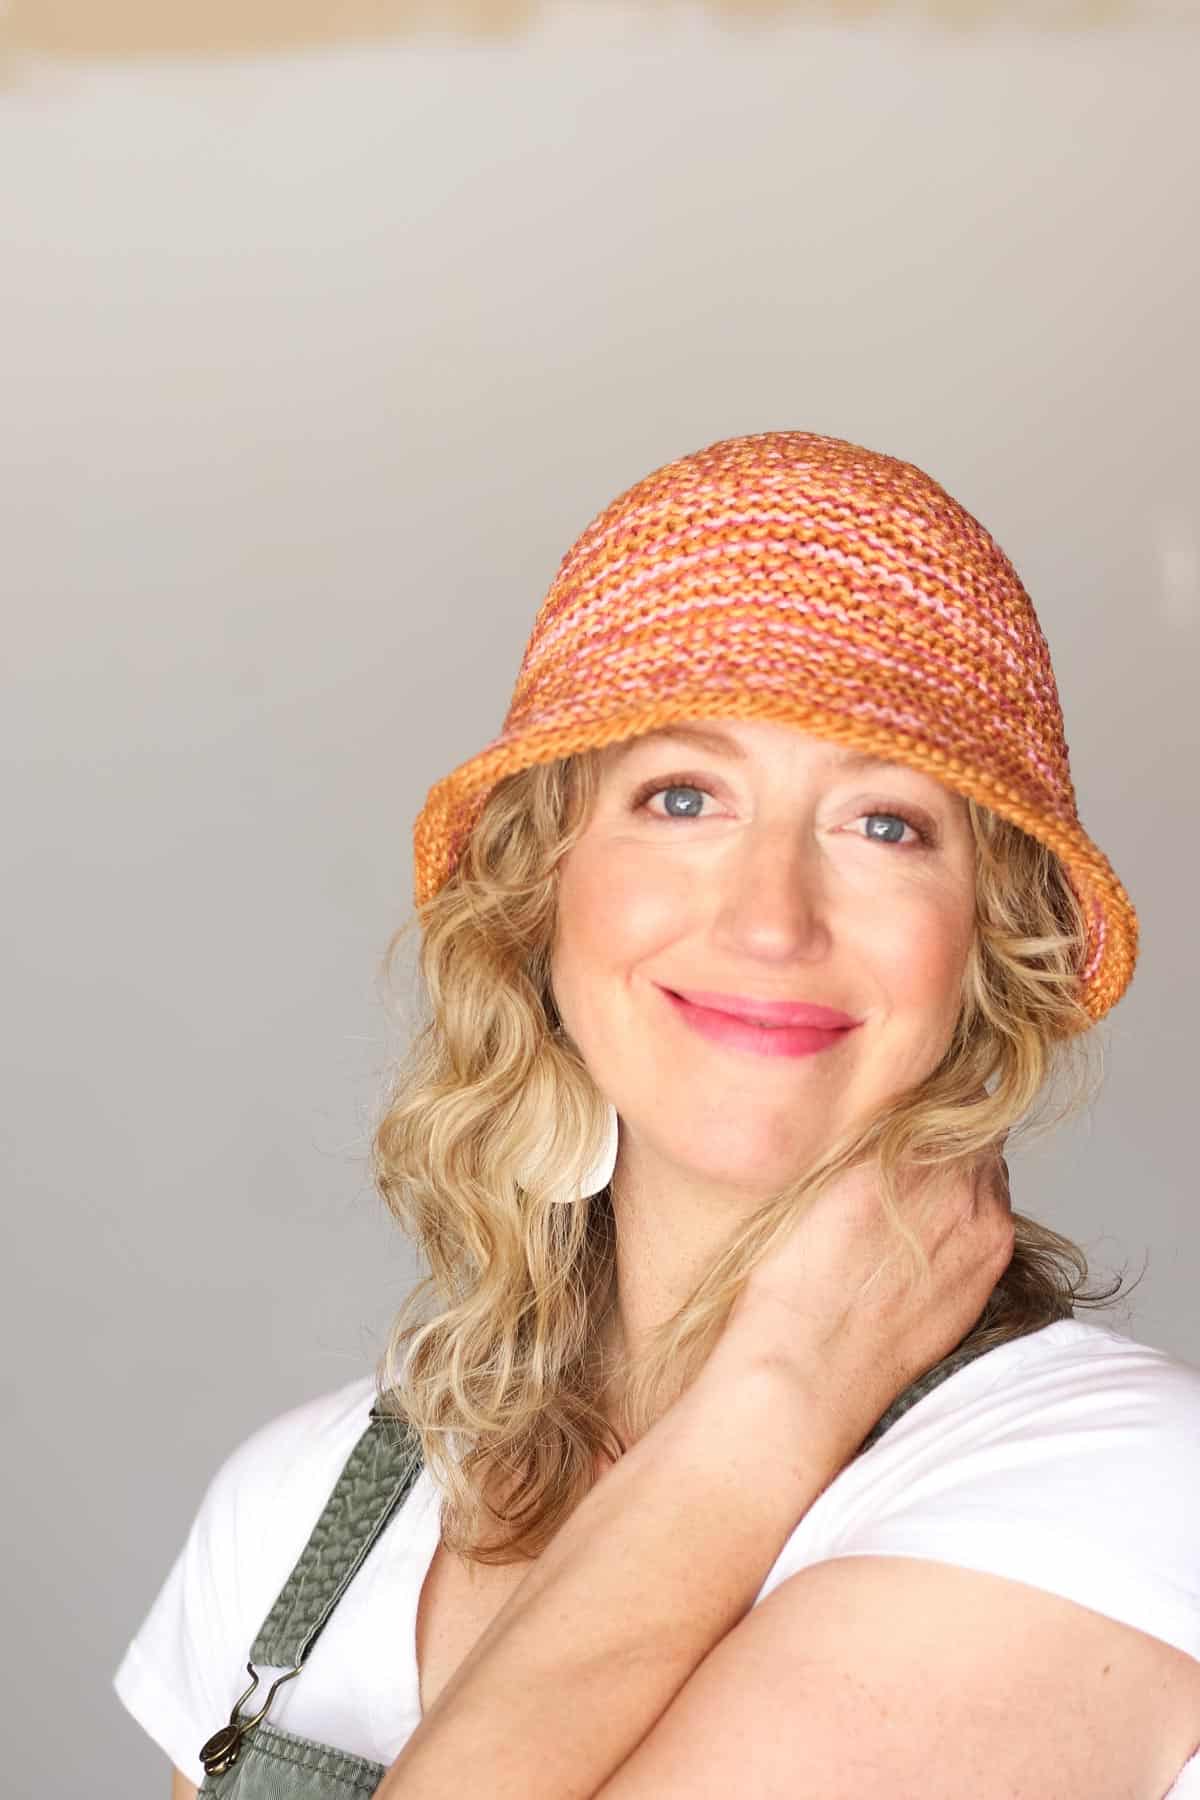 A woman smiling at camera wearing a knitted bucket hat.